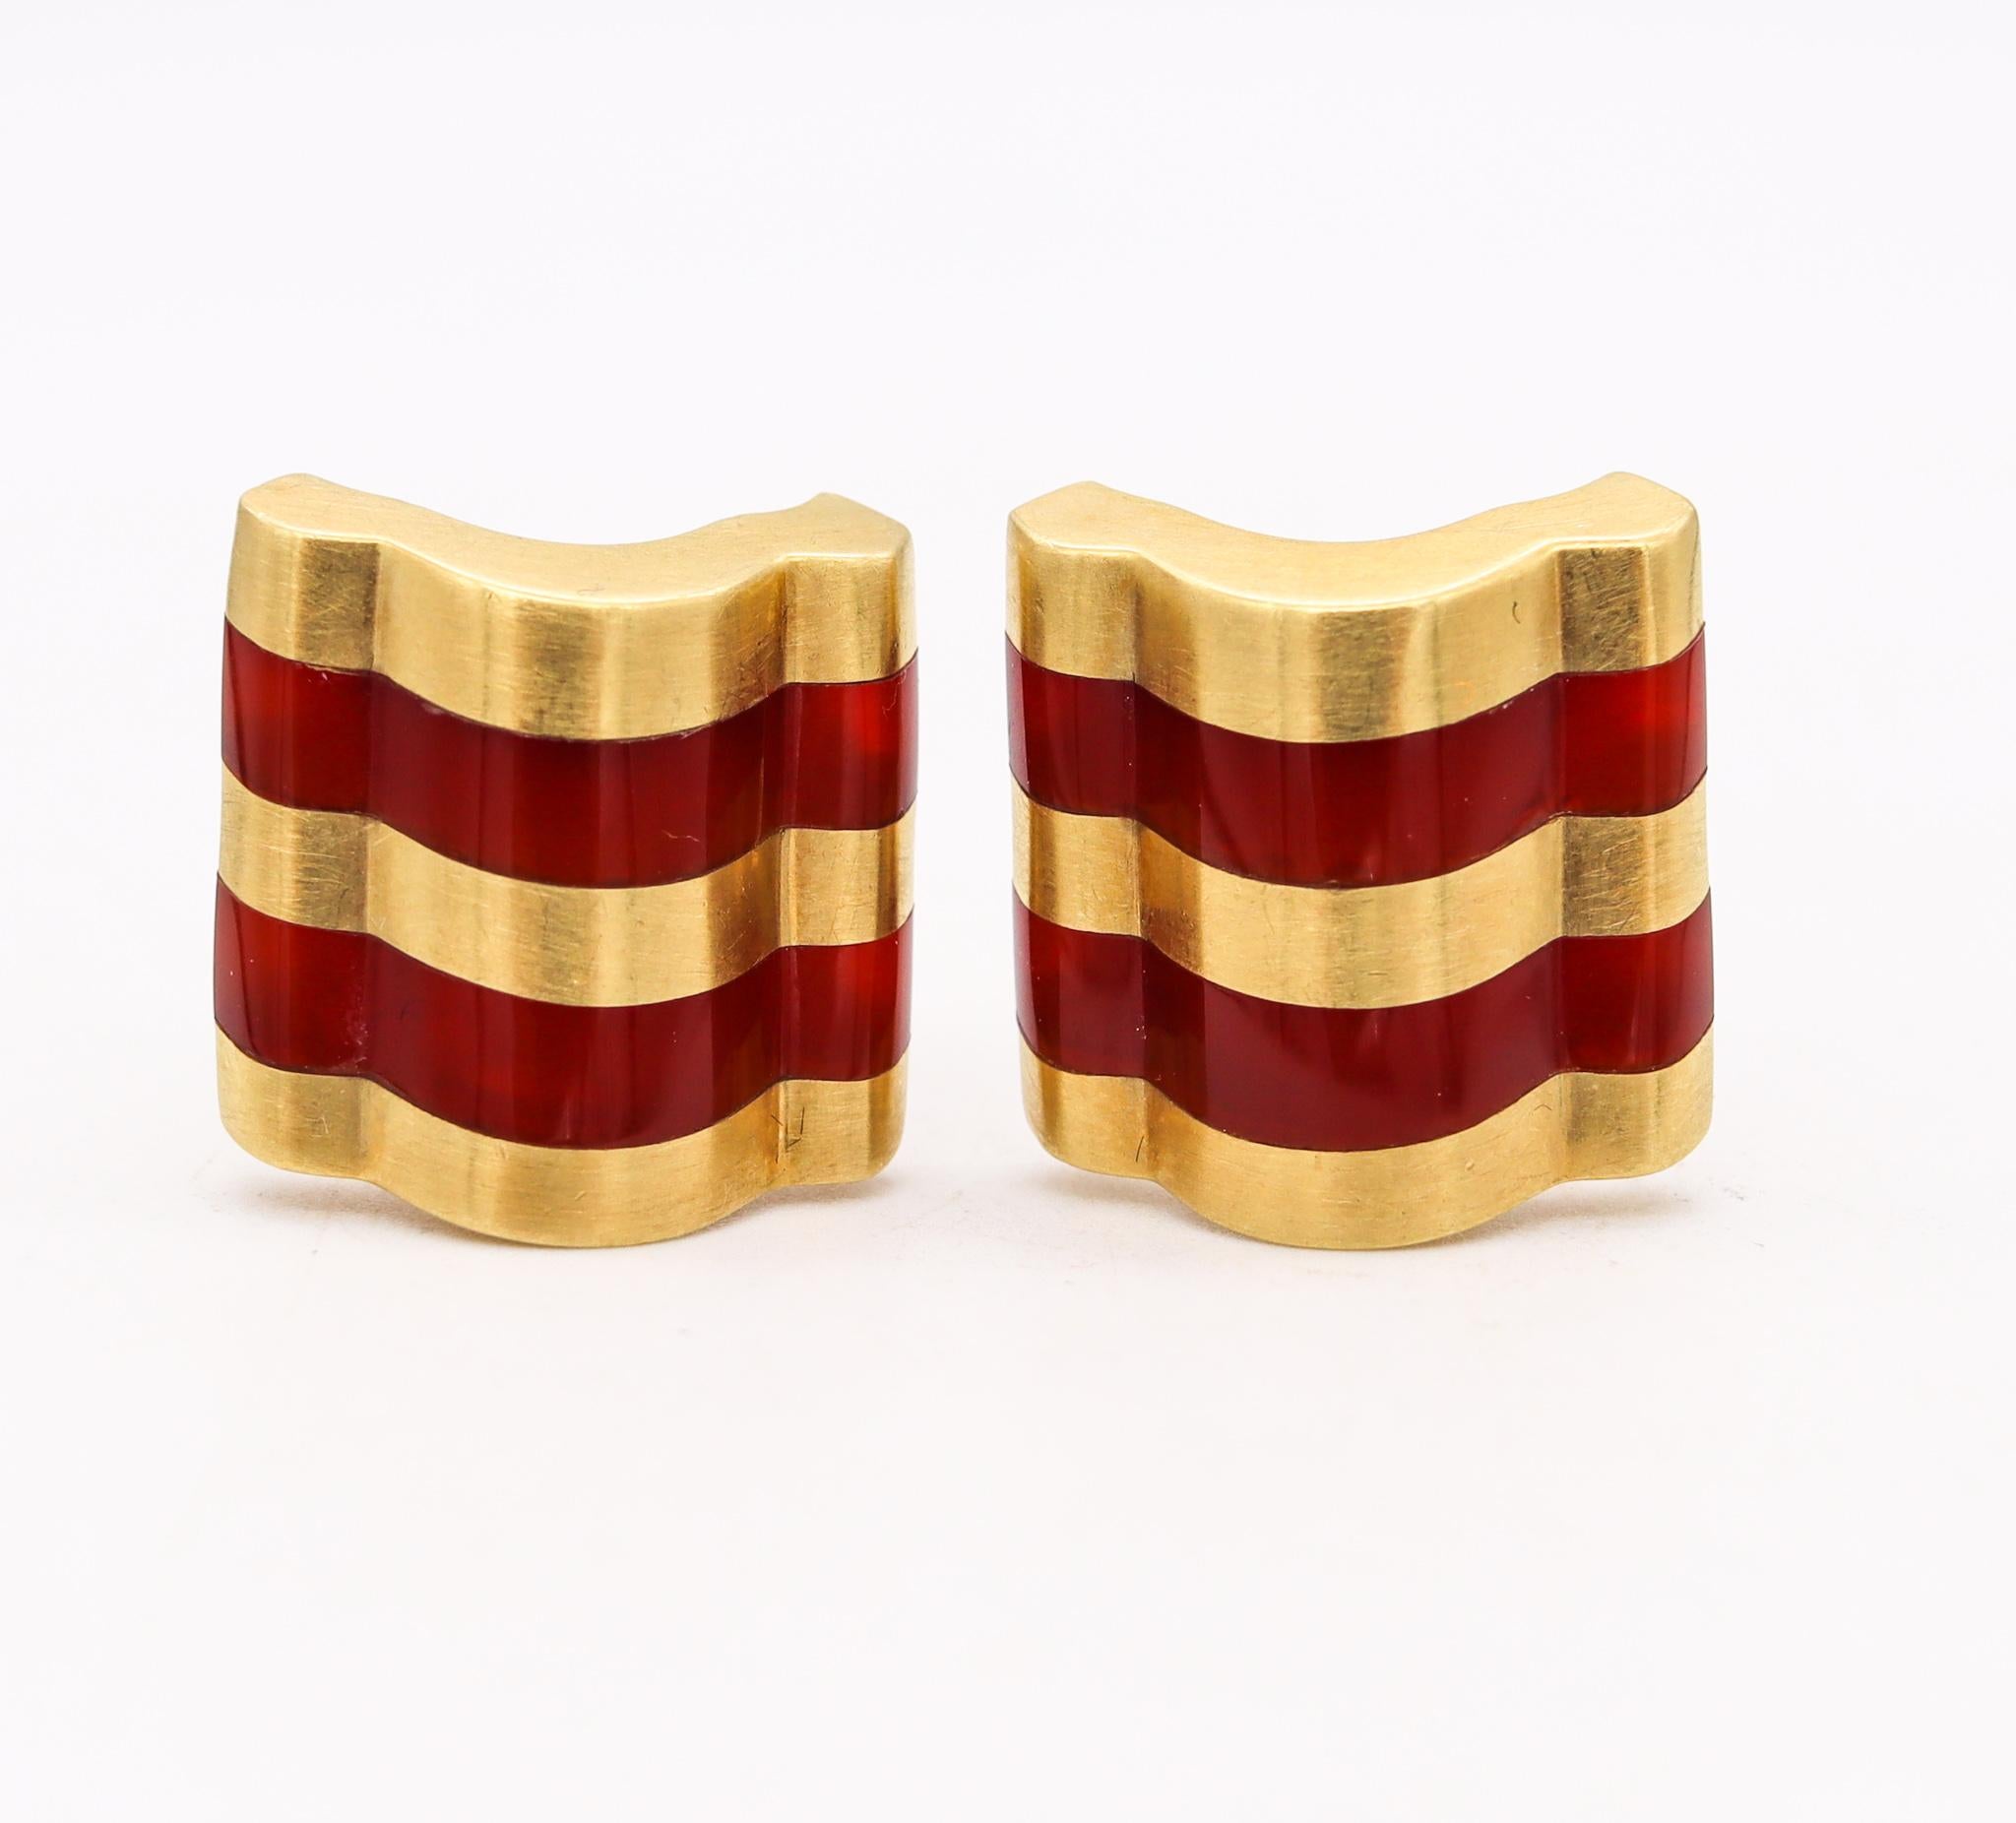 Geometric earrings designed by Angela Cummings.

Rare and beautiful three-dimensional pieces, created in New York city by Angela Cummings, back in the early 1980's. These modernist undulated clips-earrings has been crafted in solid yellow gold of 18